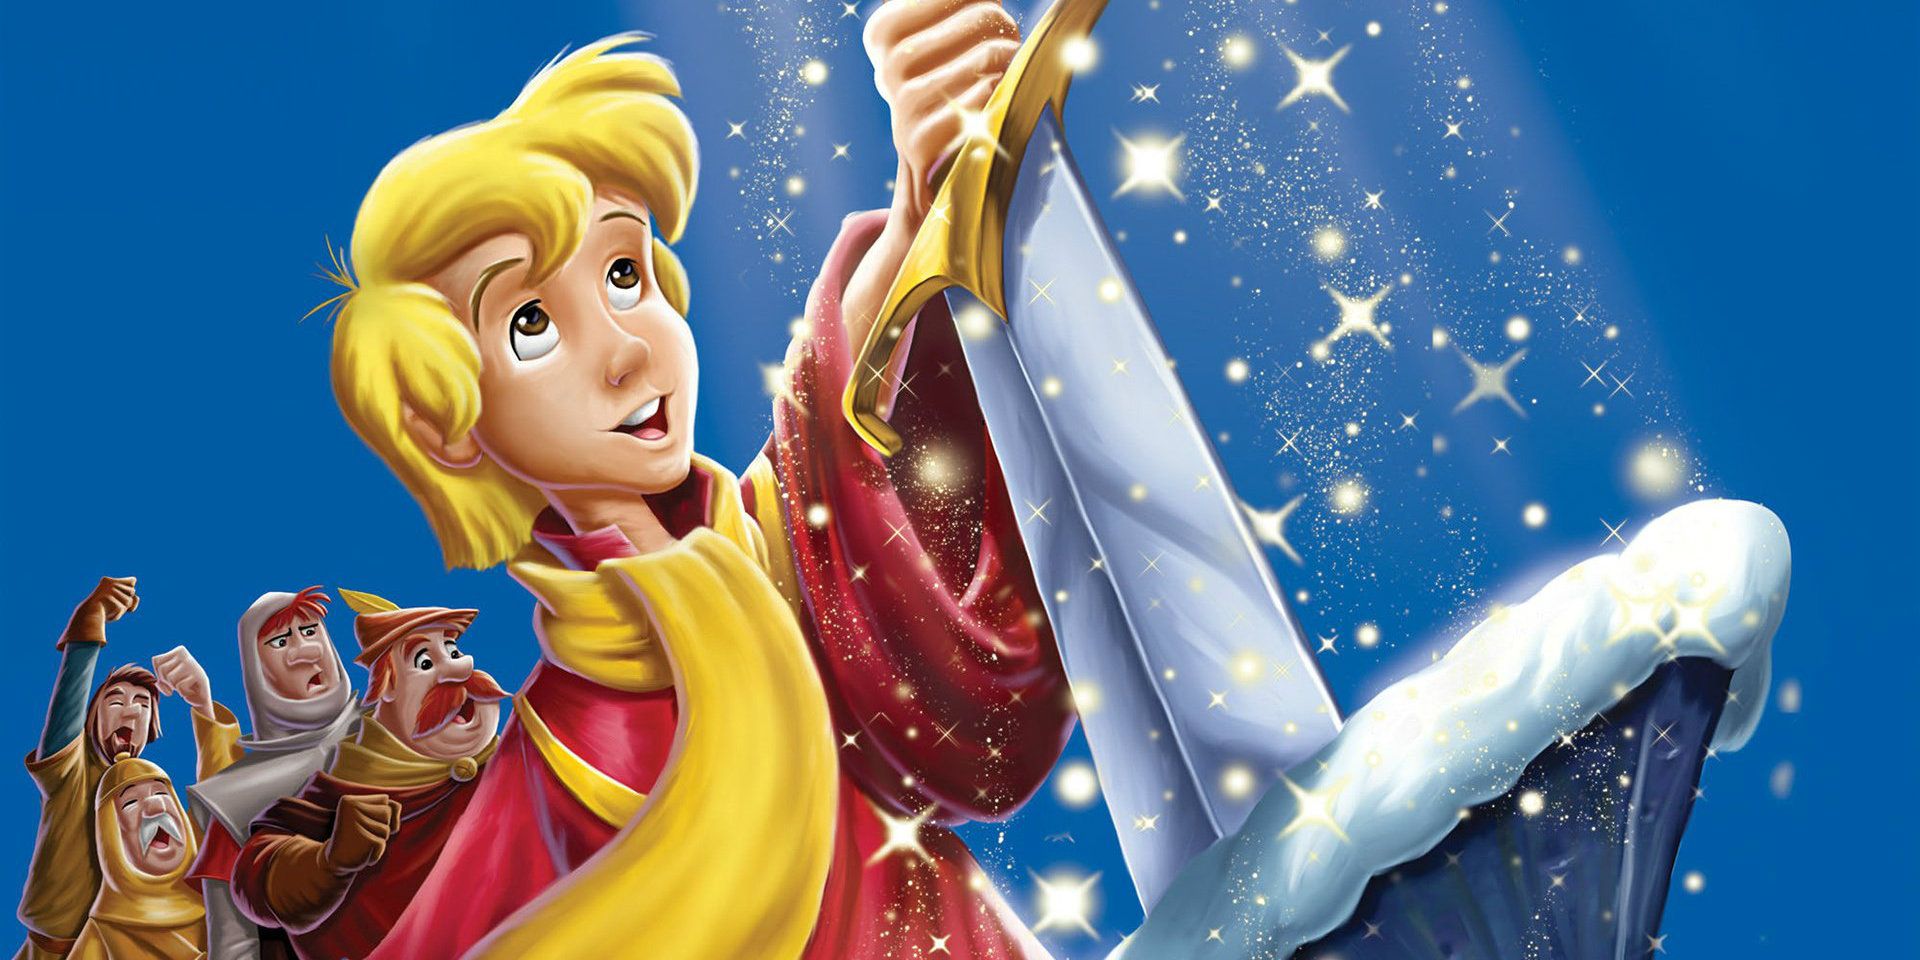 Arthur pulls the sword in Disney's animated The Sword In The Stone artwork.